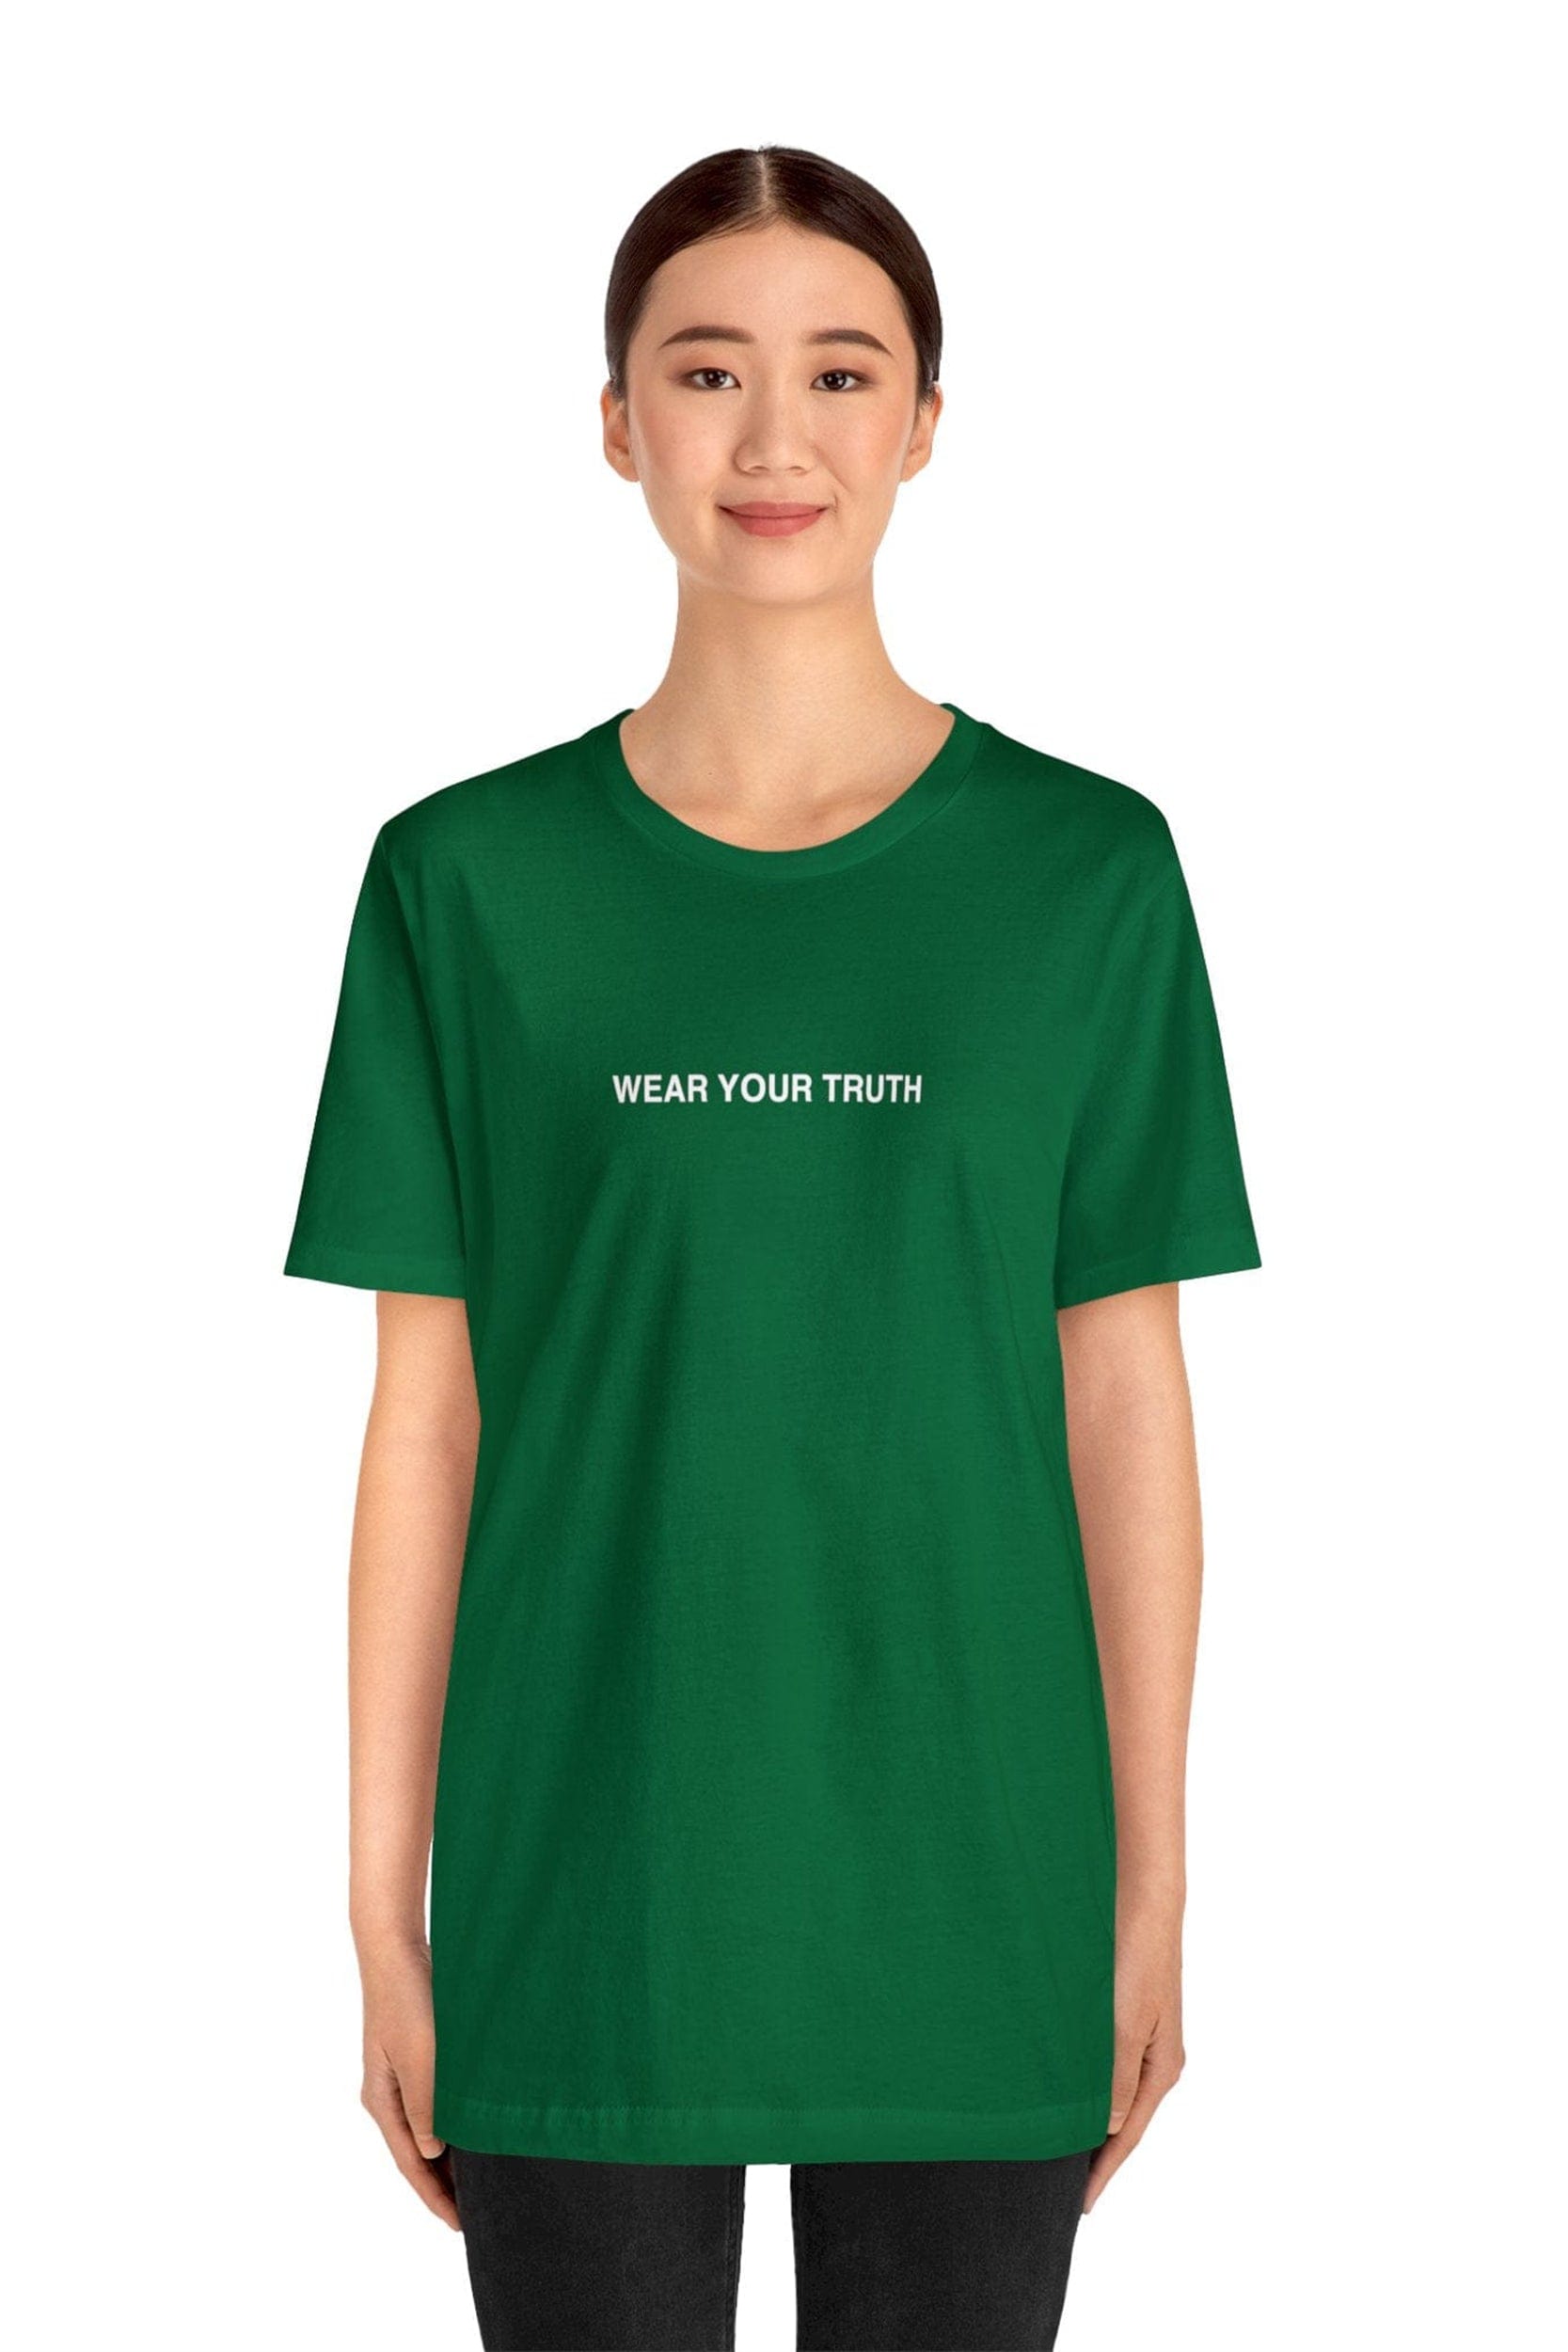 "WEAR YOUR TRUTH" T-Shirt